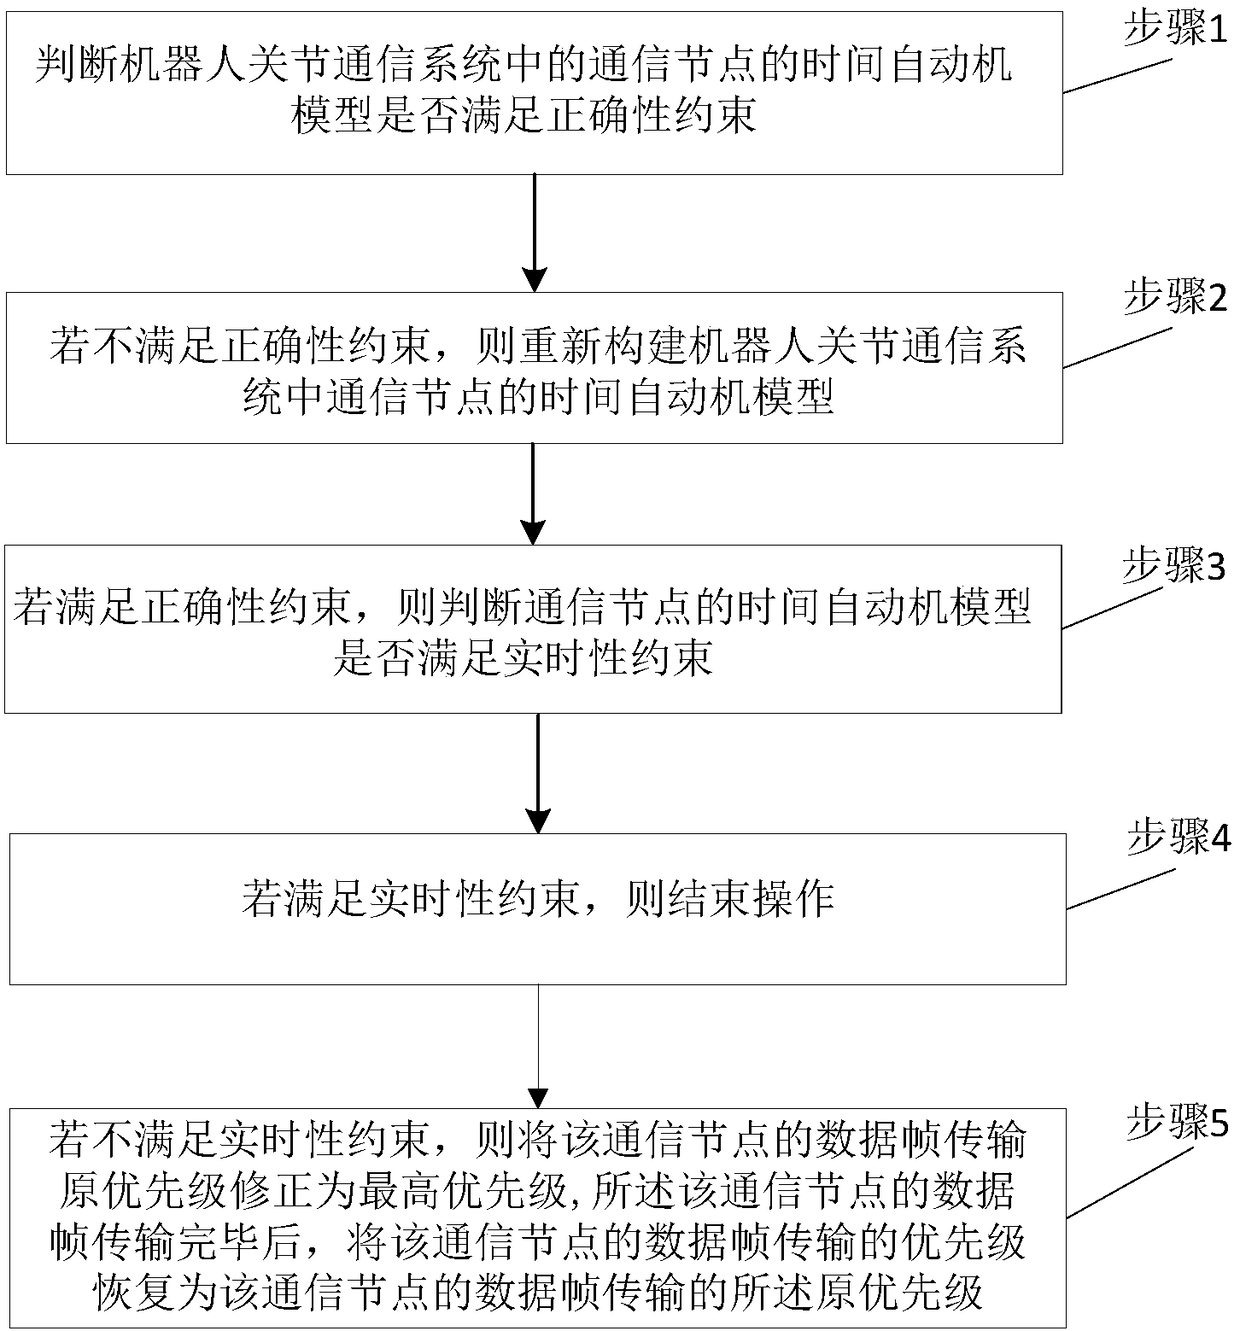 Verification method and system of robot joint communication system model